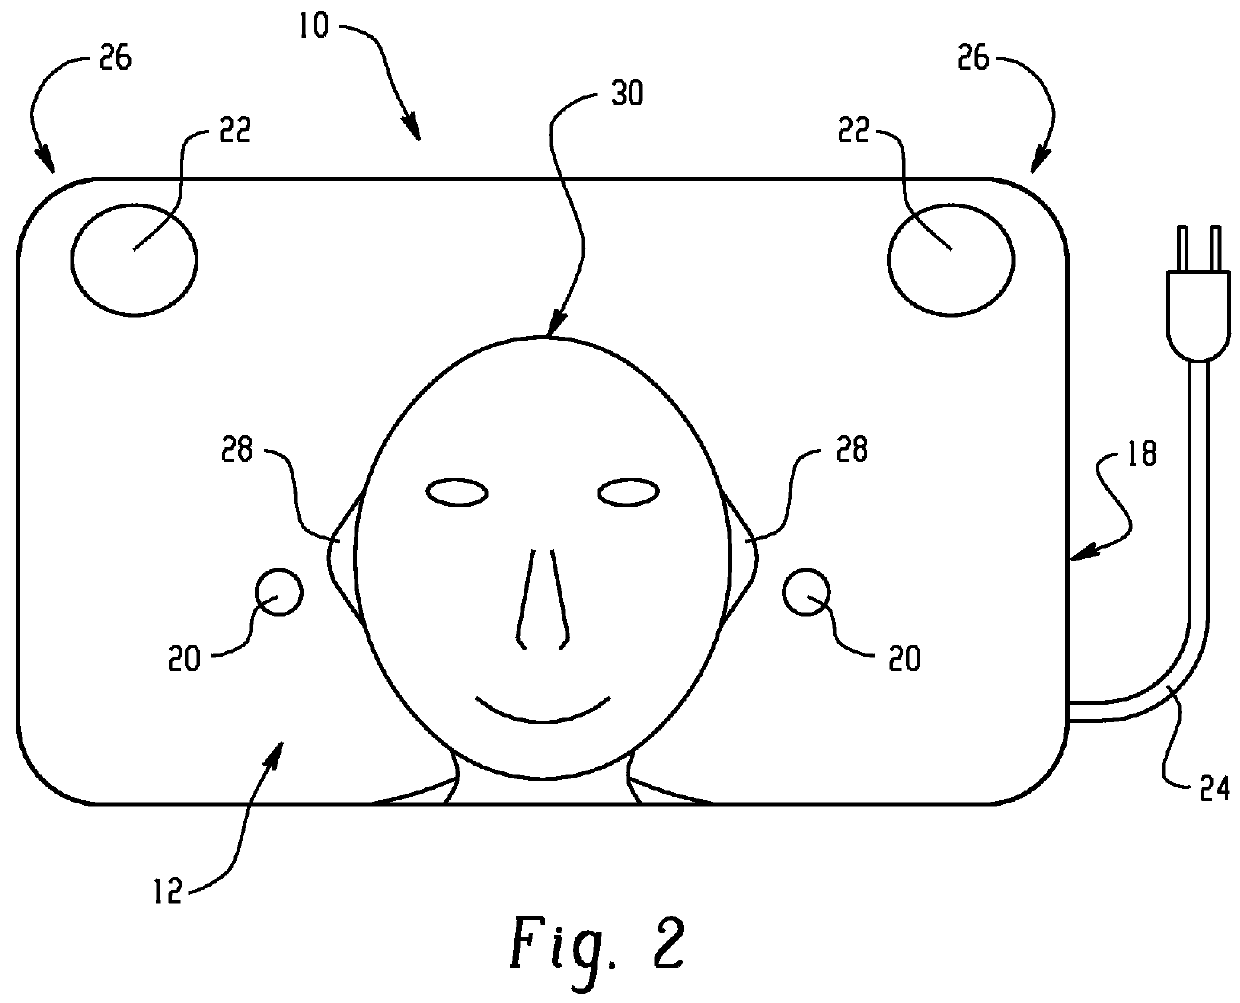 Smart pillows and processes for providing active noise cancellation and biofeedback